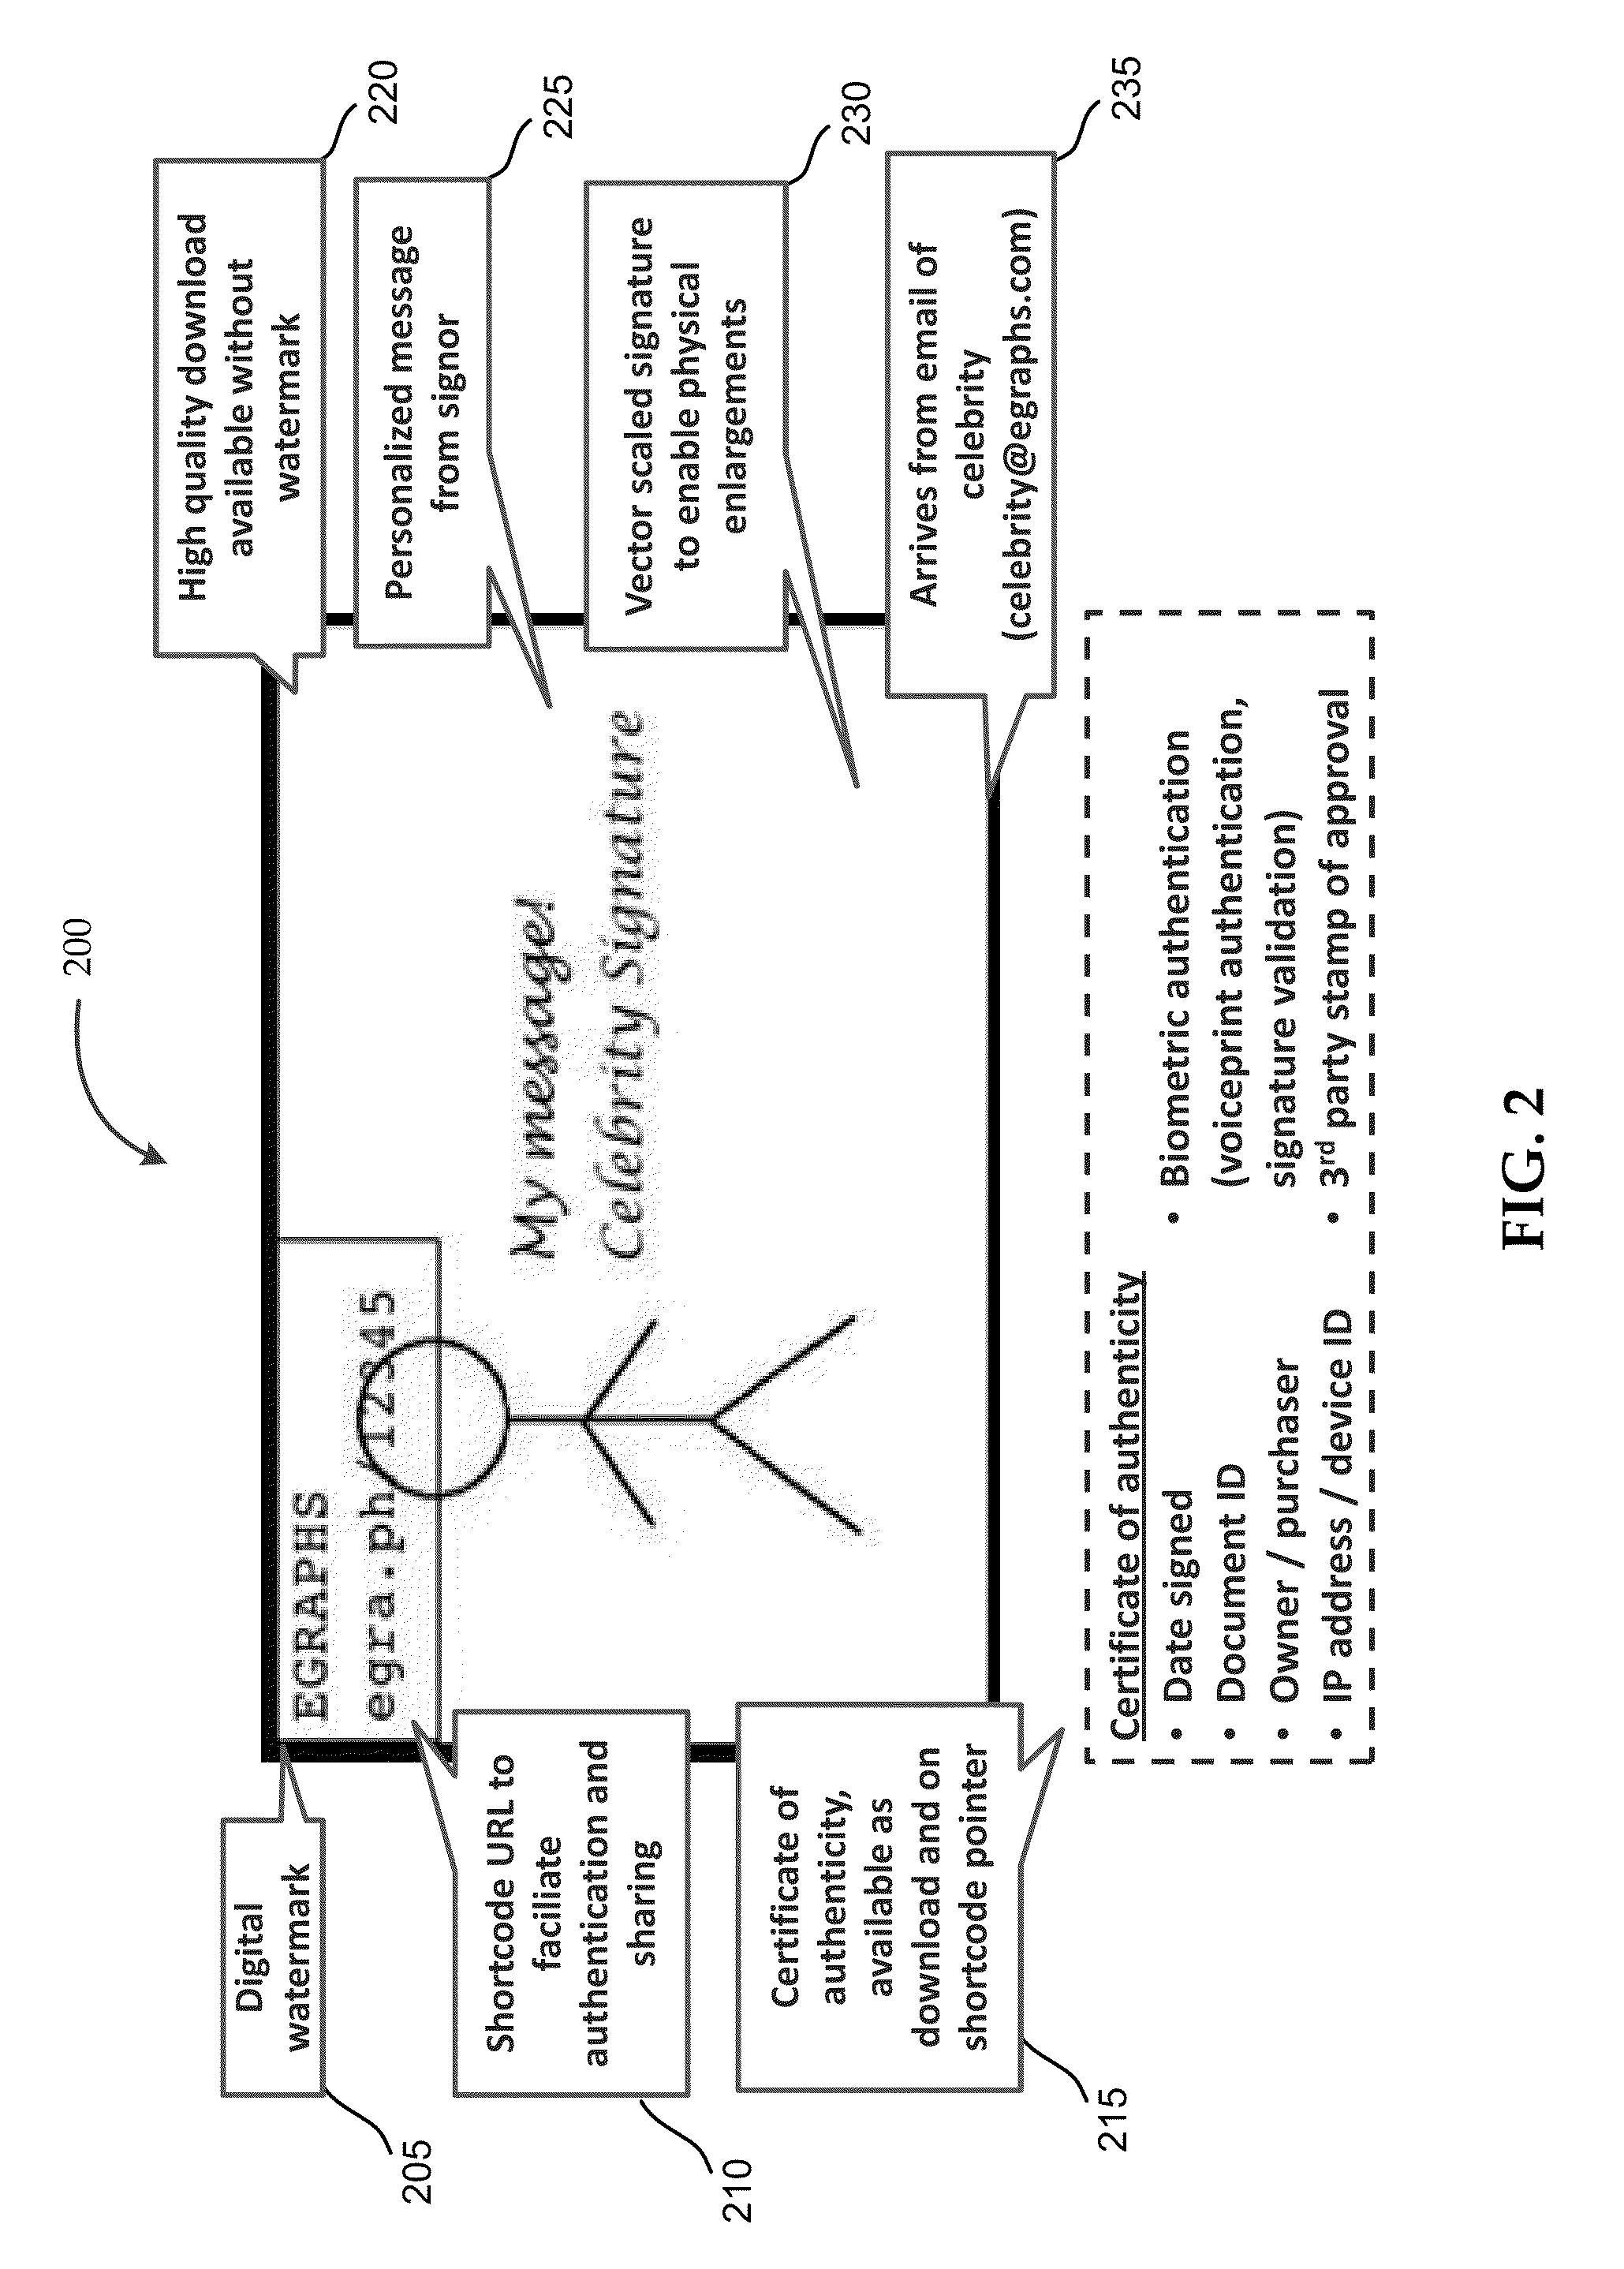 Method and System for Replaying a Voice Message and Displaying a Signed Digital Photograph Contemporaneously